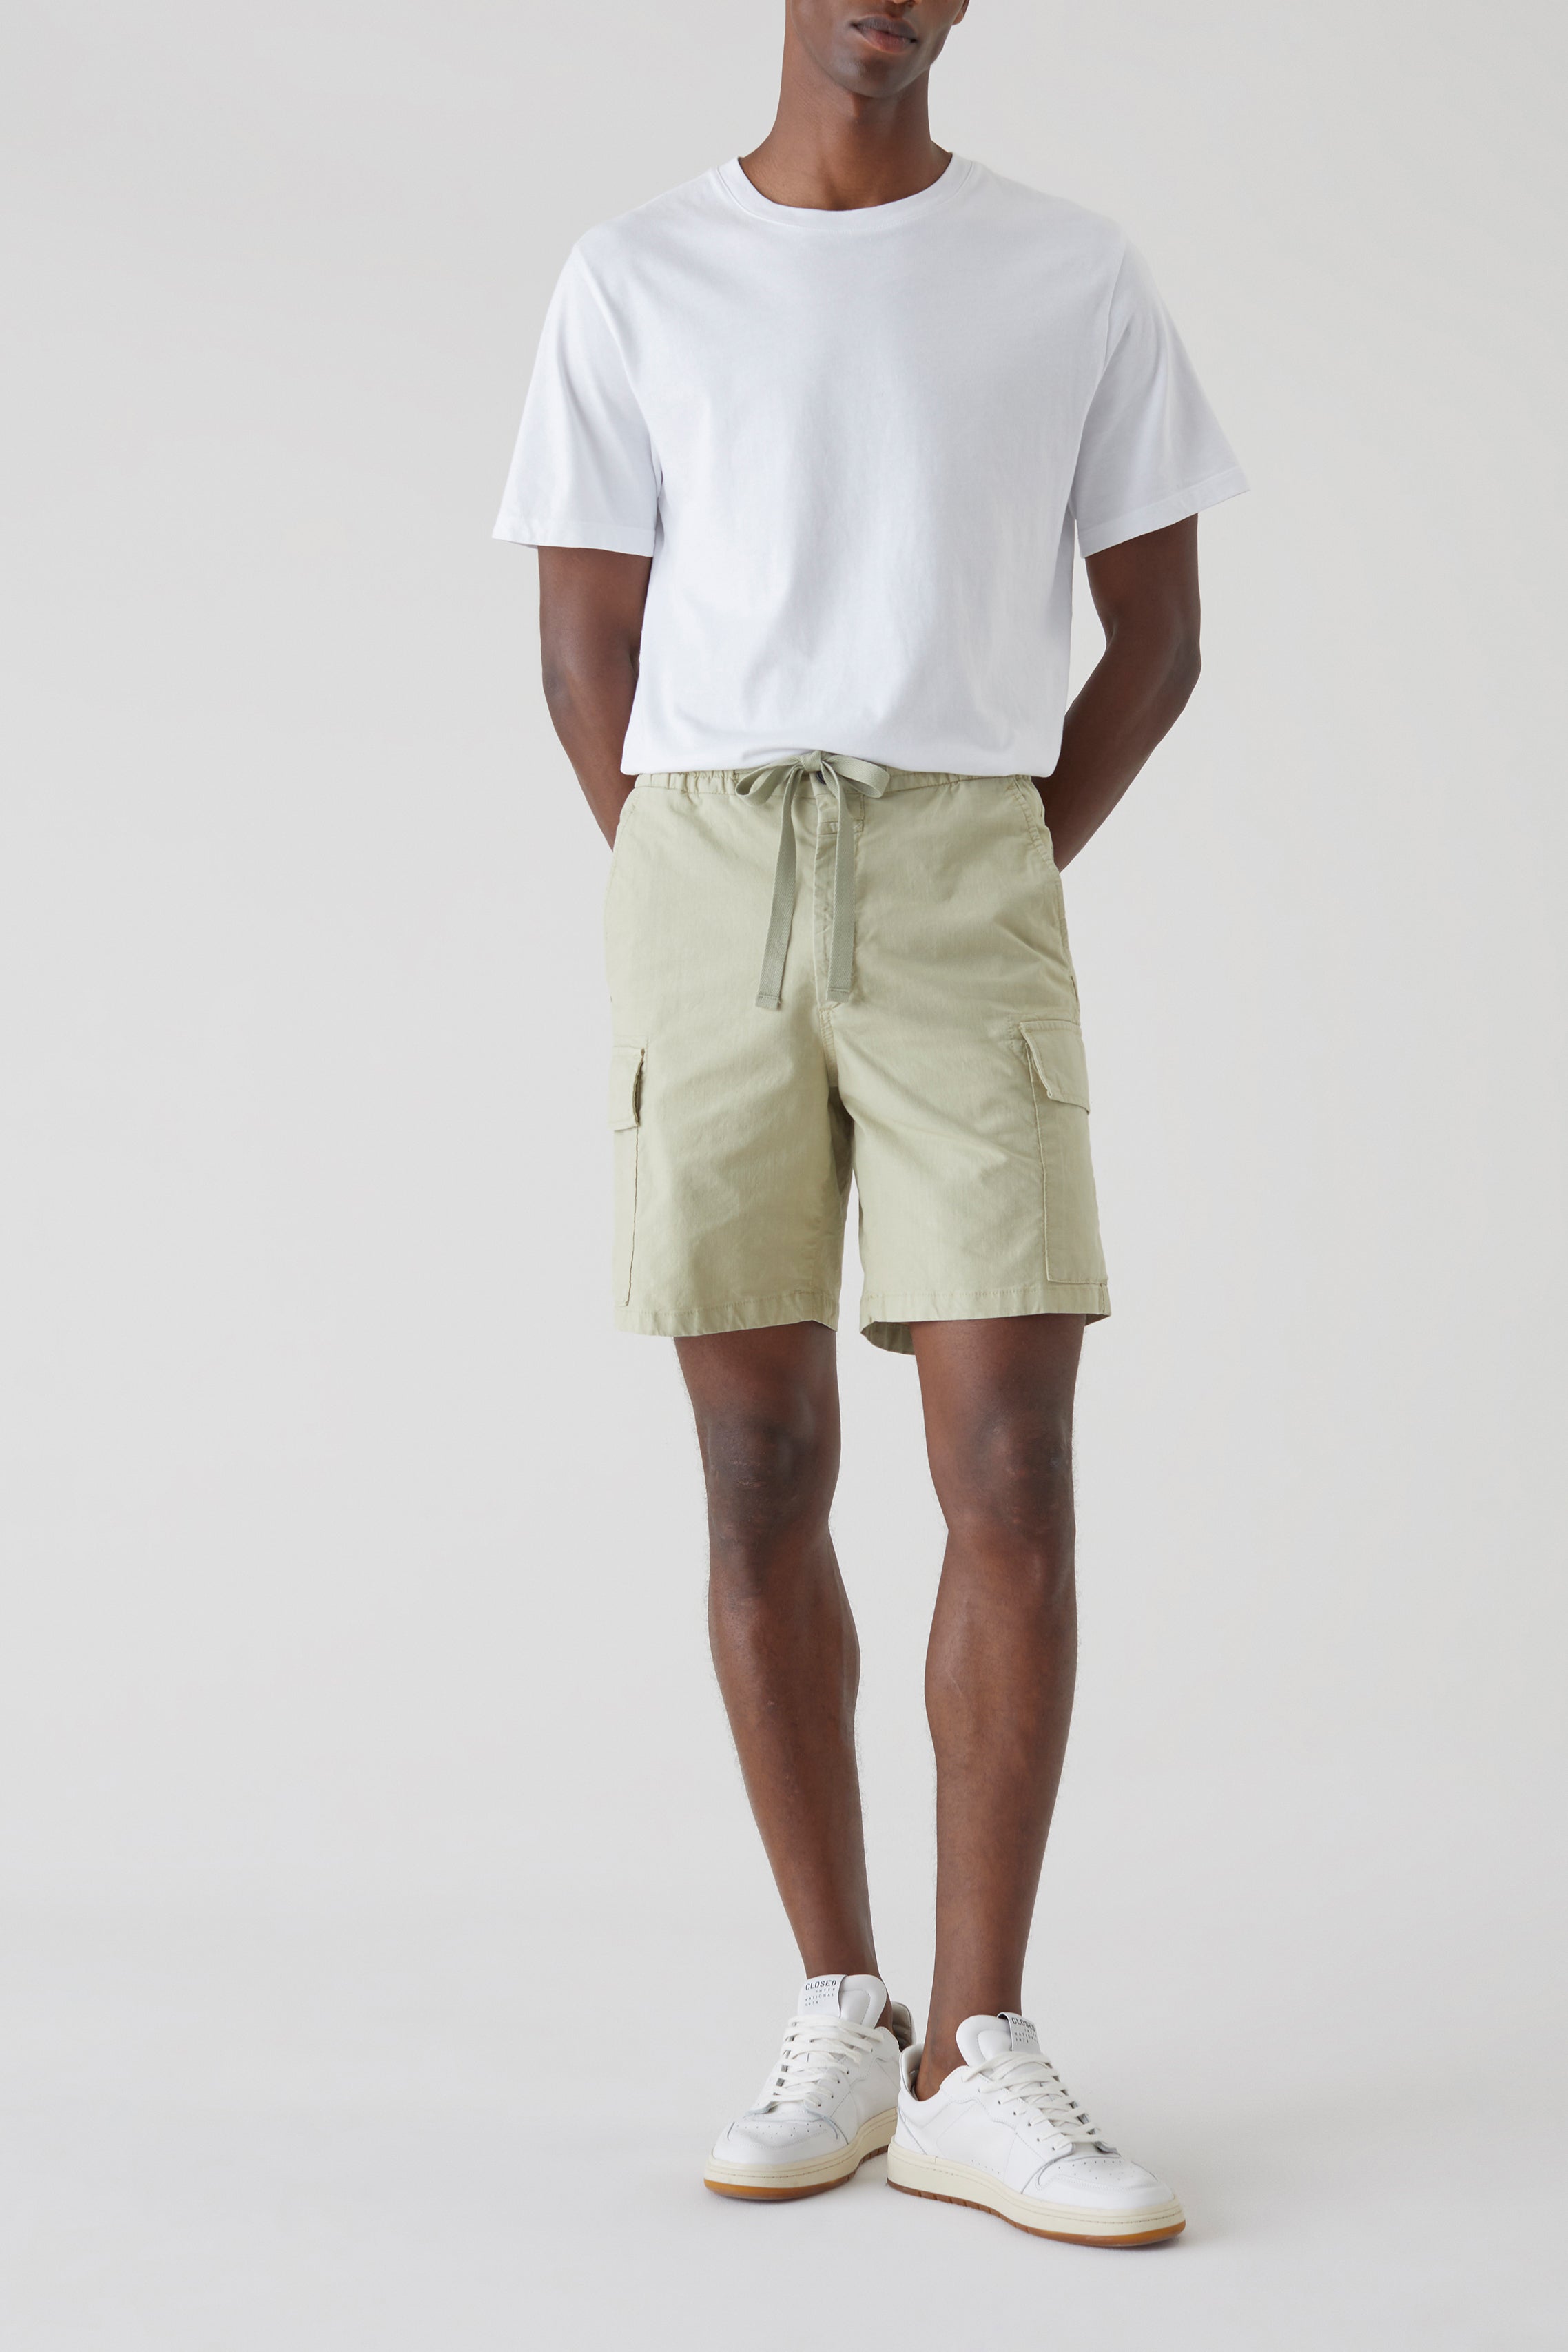 CLOSED-OUTLET-SALE-DRAWSTRING-CARGO-SHORTS-Hosen-ARCHIVE-COLLECTION.jpg